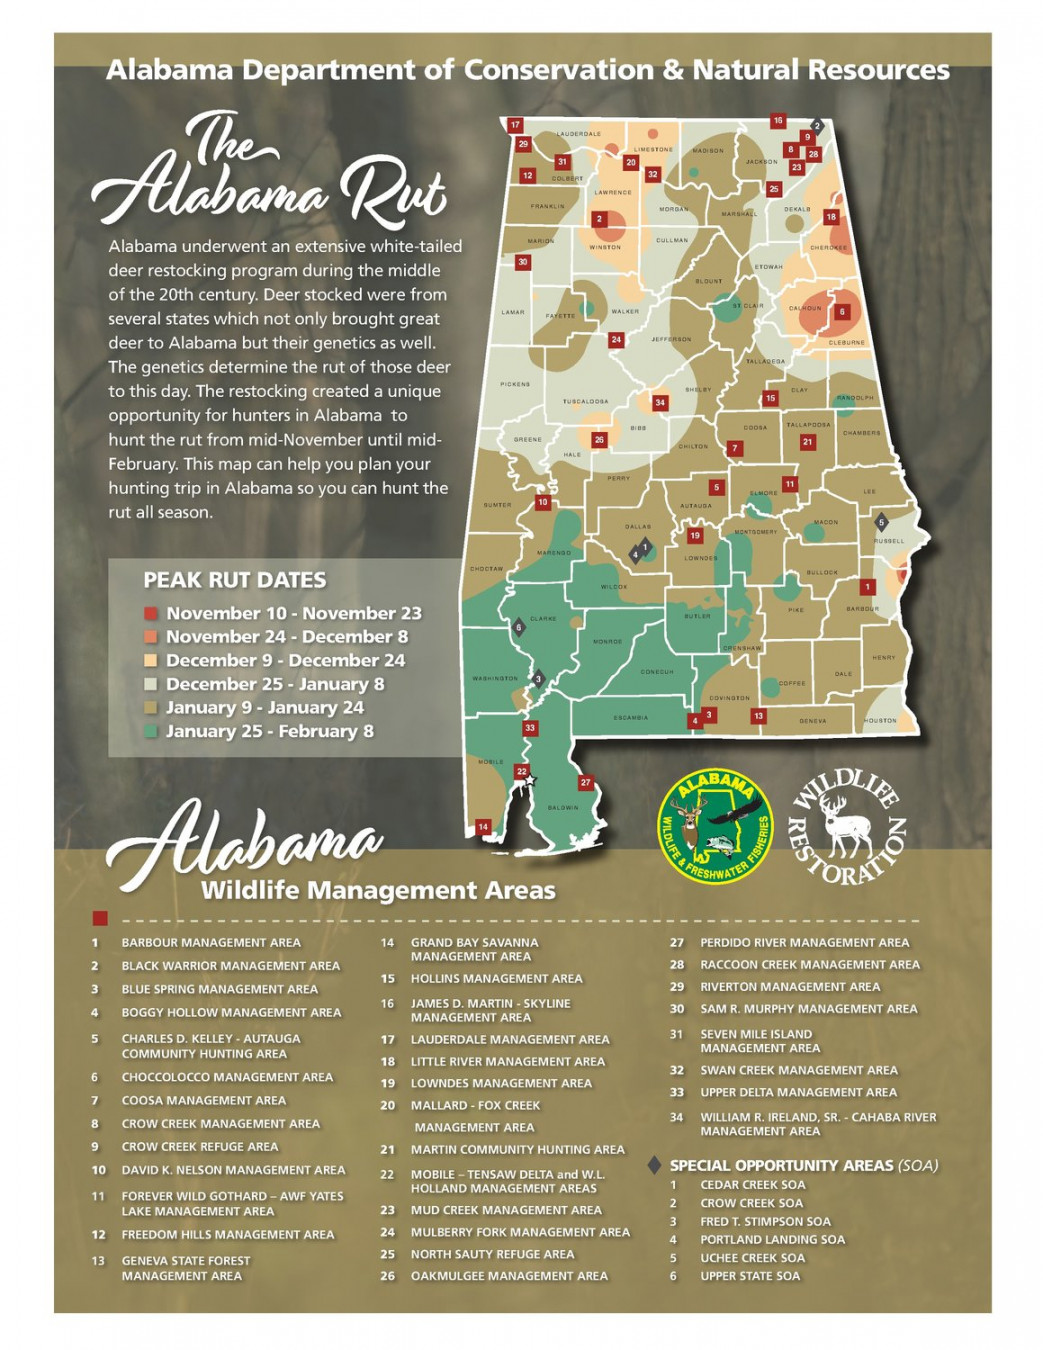 Tips for hunting the rut in Alabama - Gulf Coast Media